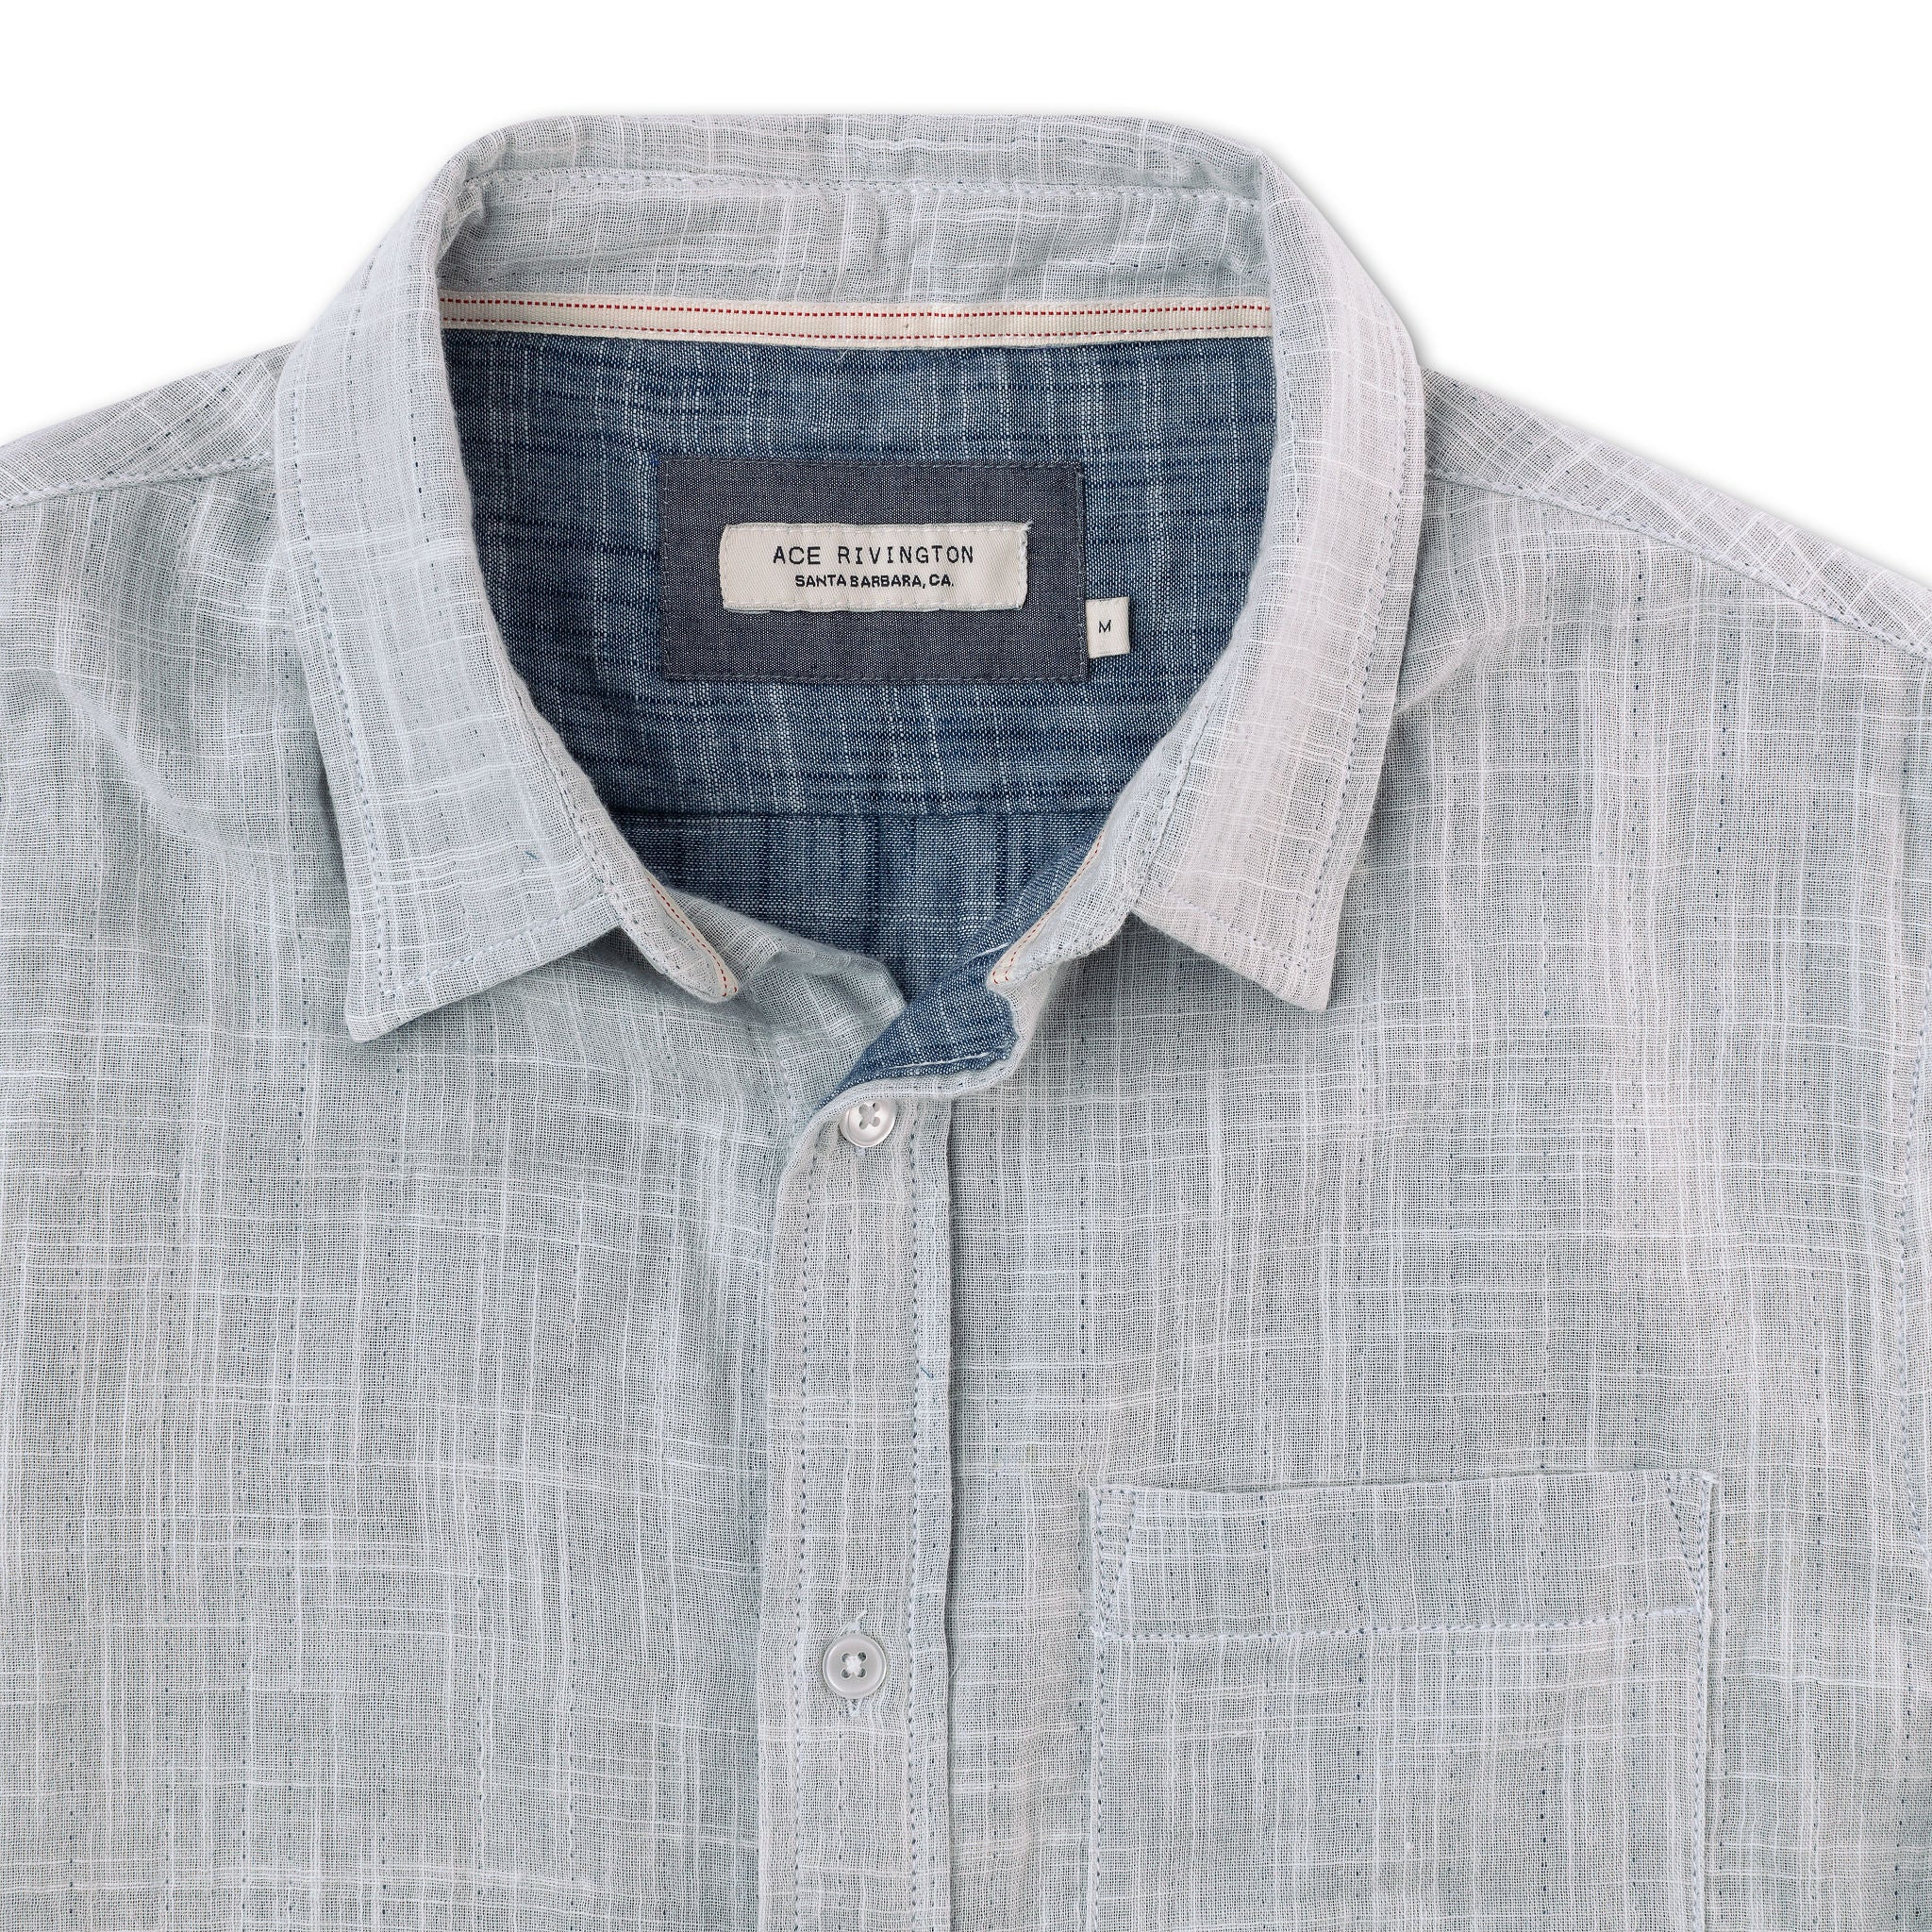 close up of collar, buttons, pocket, and tag on front of men's double gauze short sleeve button up shirt with a single pocket and indigo slub cotton interior